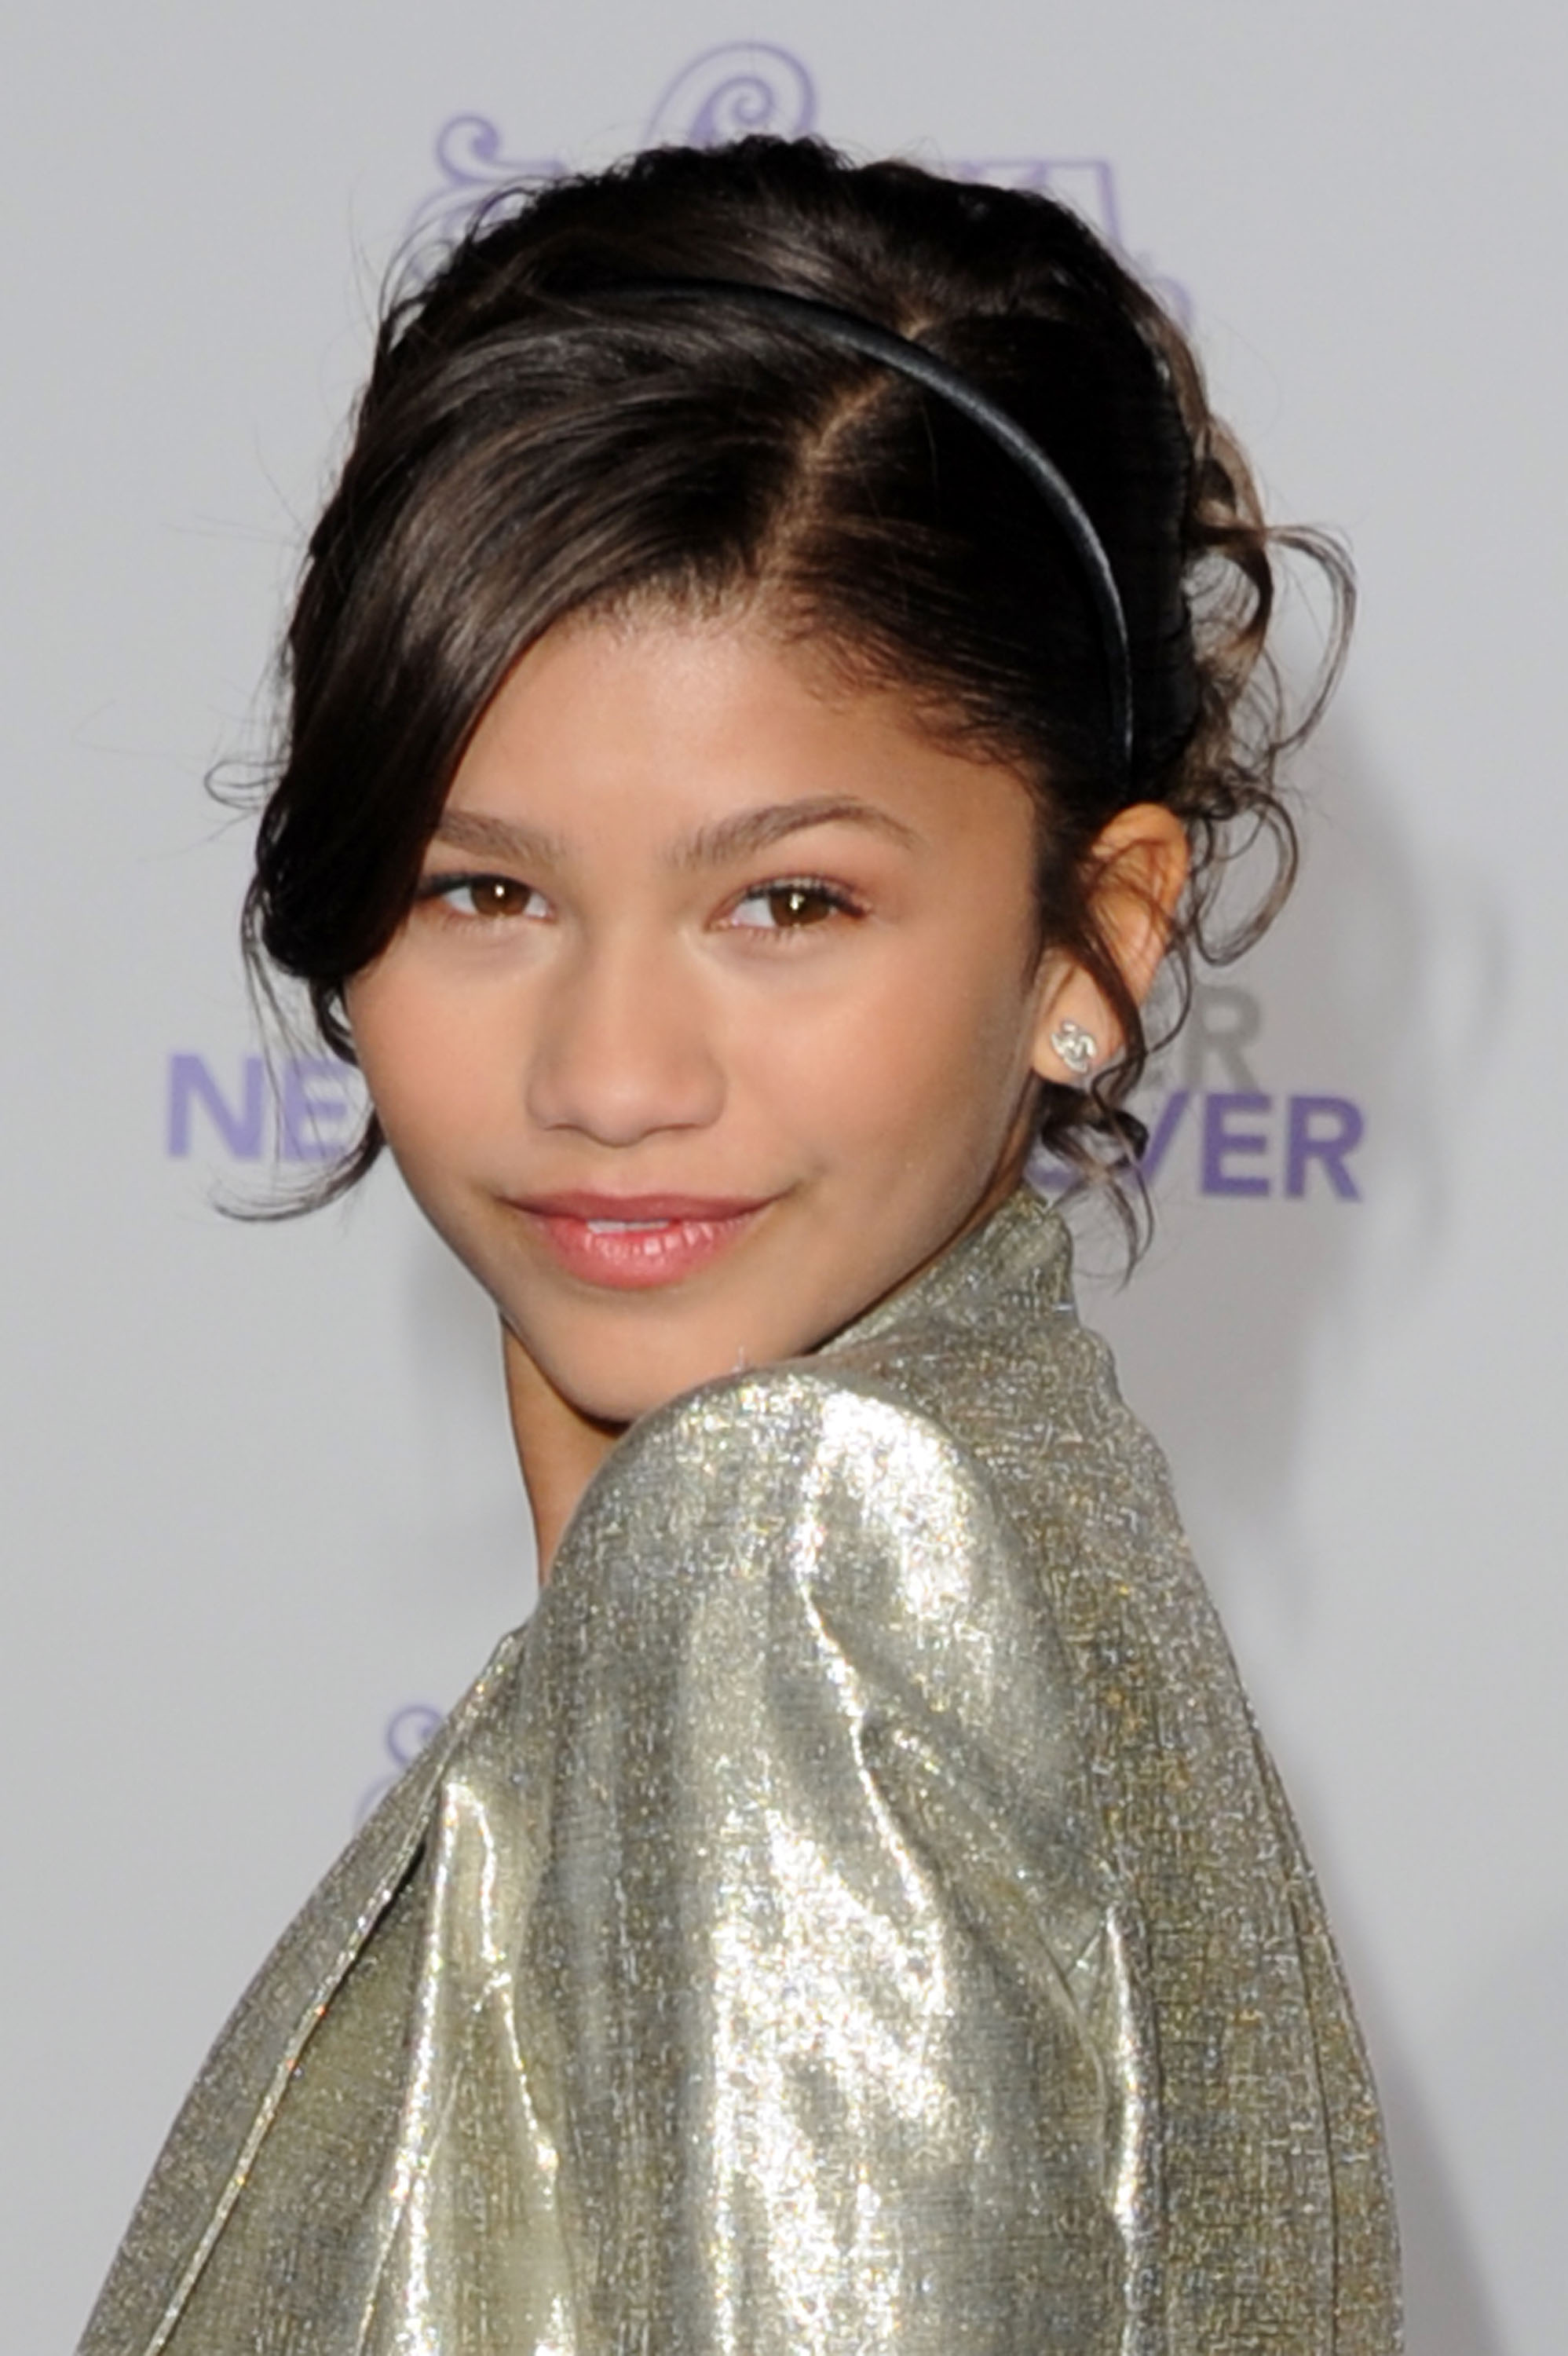 Zendaya Coleman arrives at the premiere of Paramount Pictures' "Justin Bieber: Never Say Never" held at Nokia Theater L.A. Live in Los Angeles, California, on February 8, 2011. | Source: Getty Images